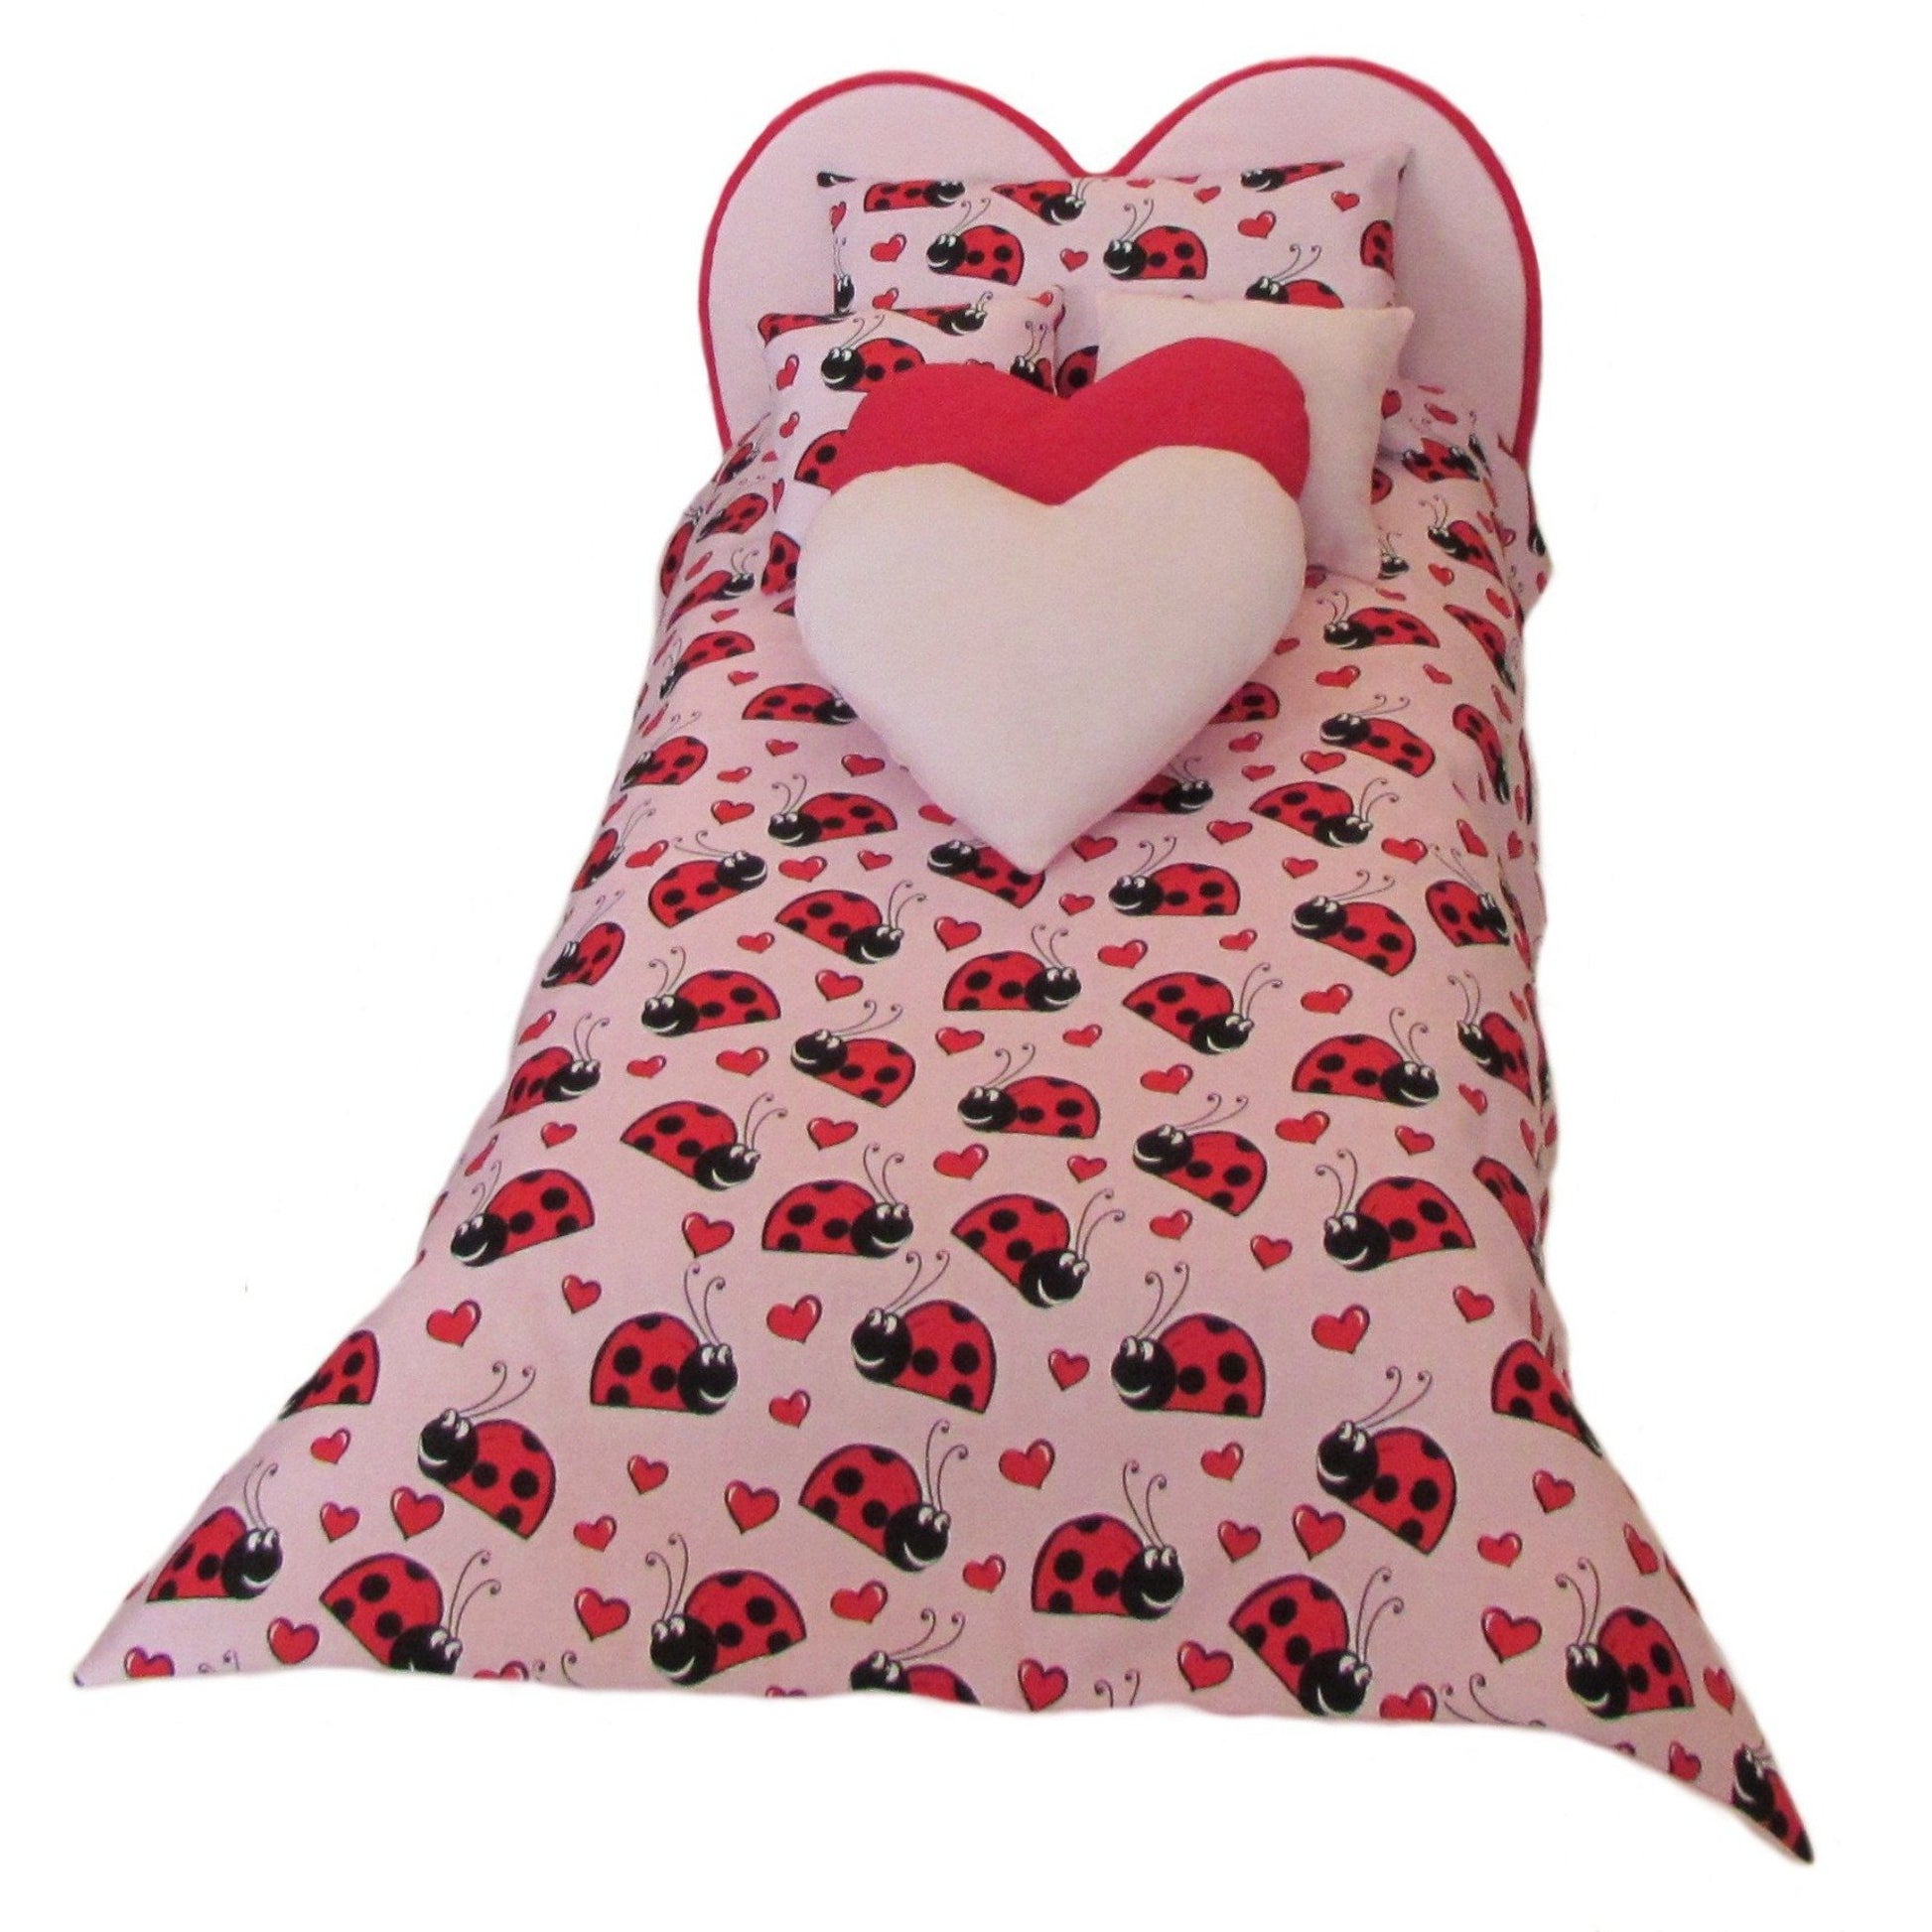 Pink Ladybug Hearts Doll Comforter Set and Red Trimmed Pink Heart Upholstered Bed for 18-inhc dolls Second view